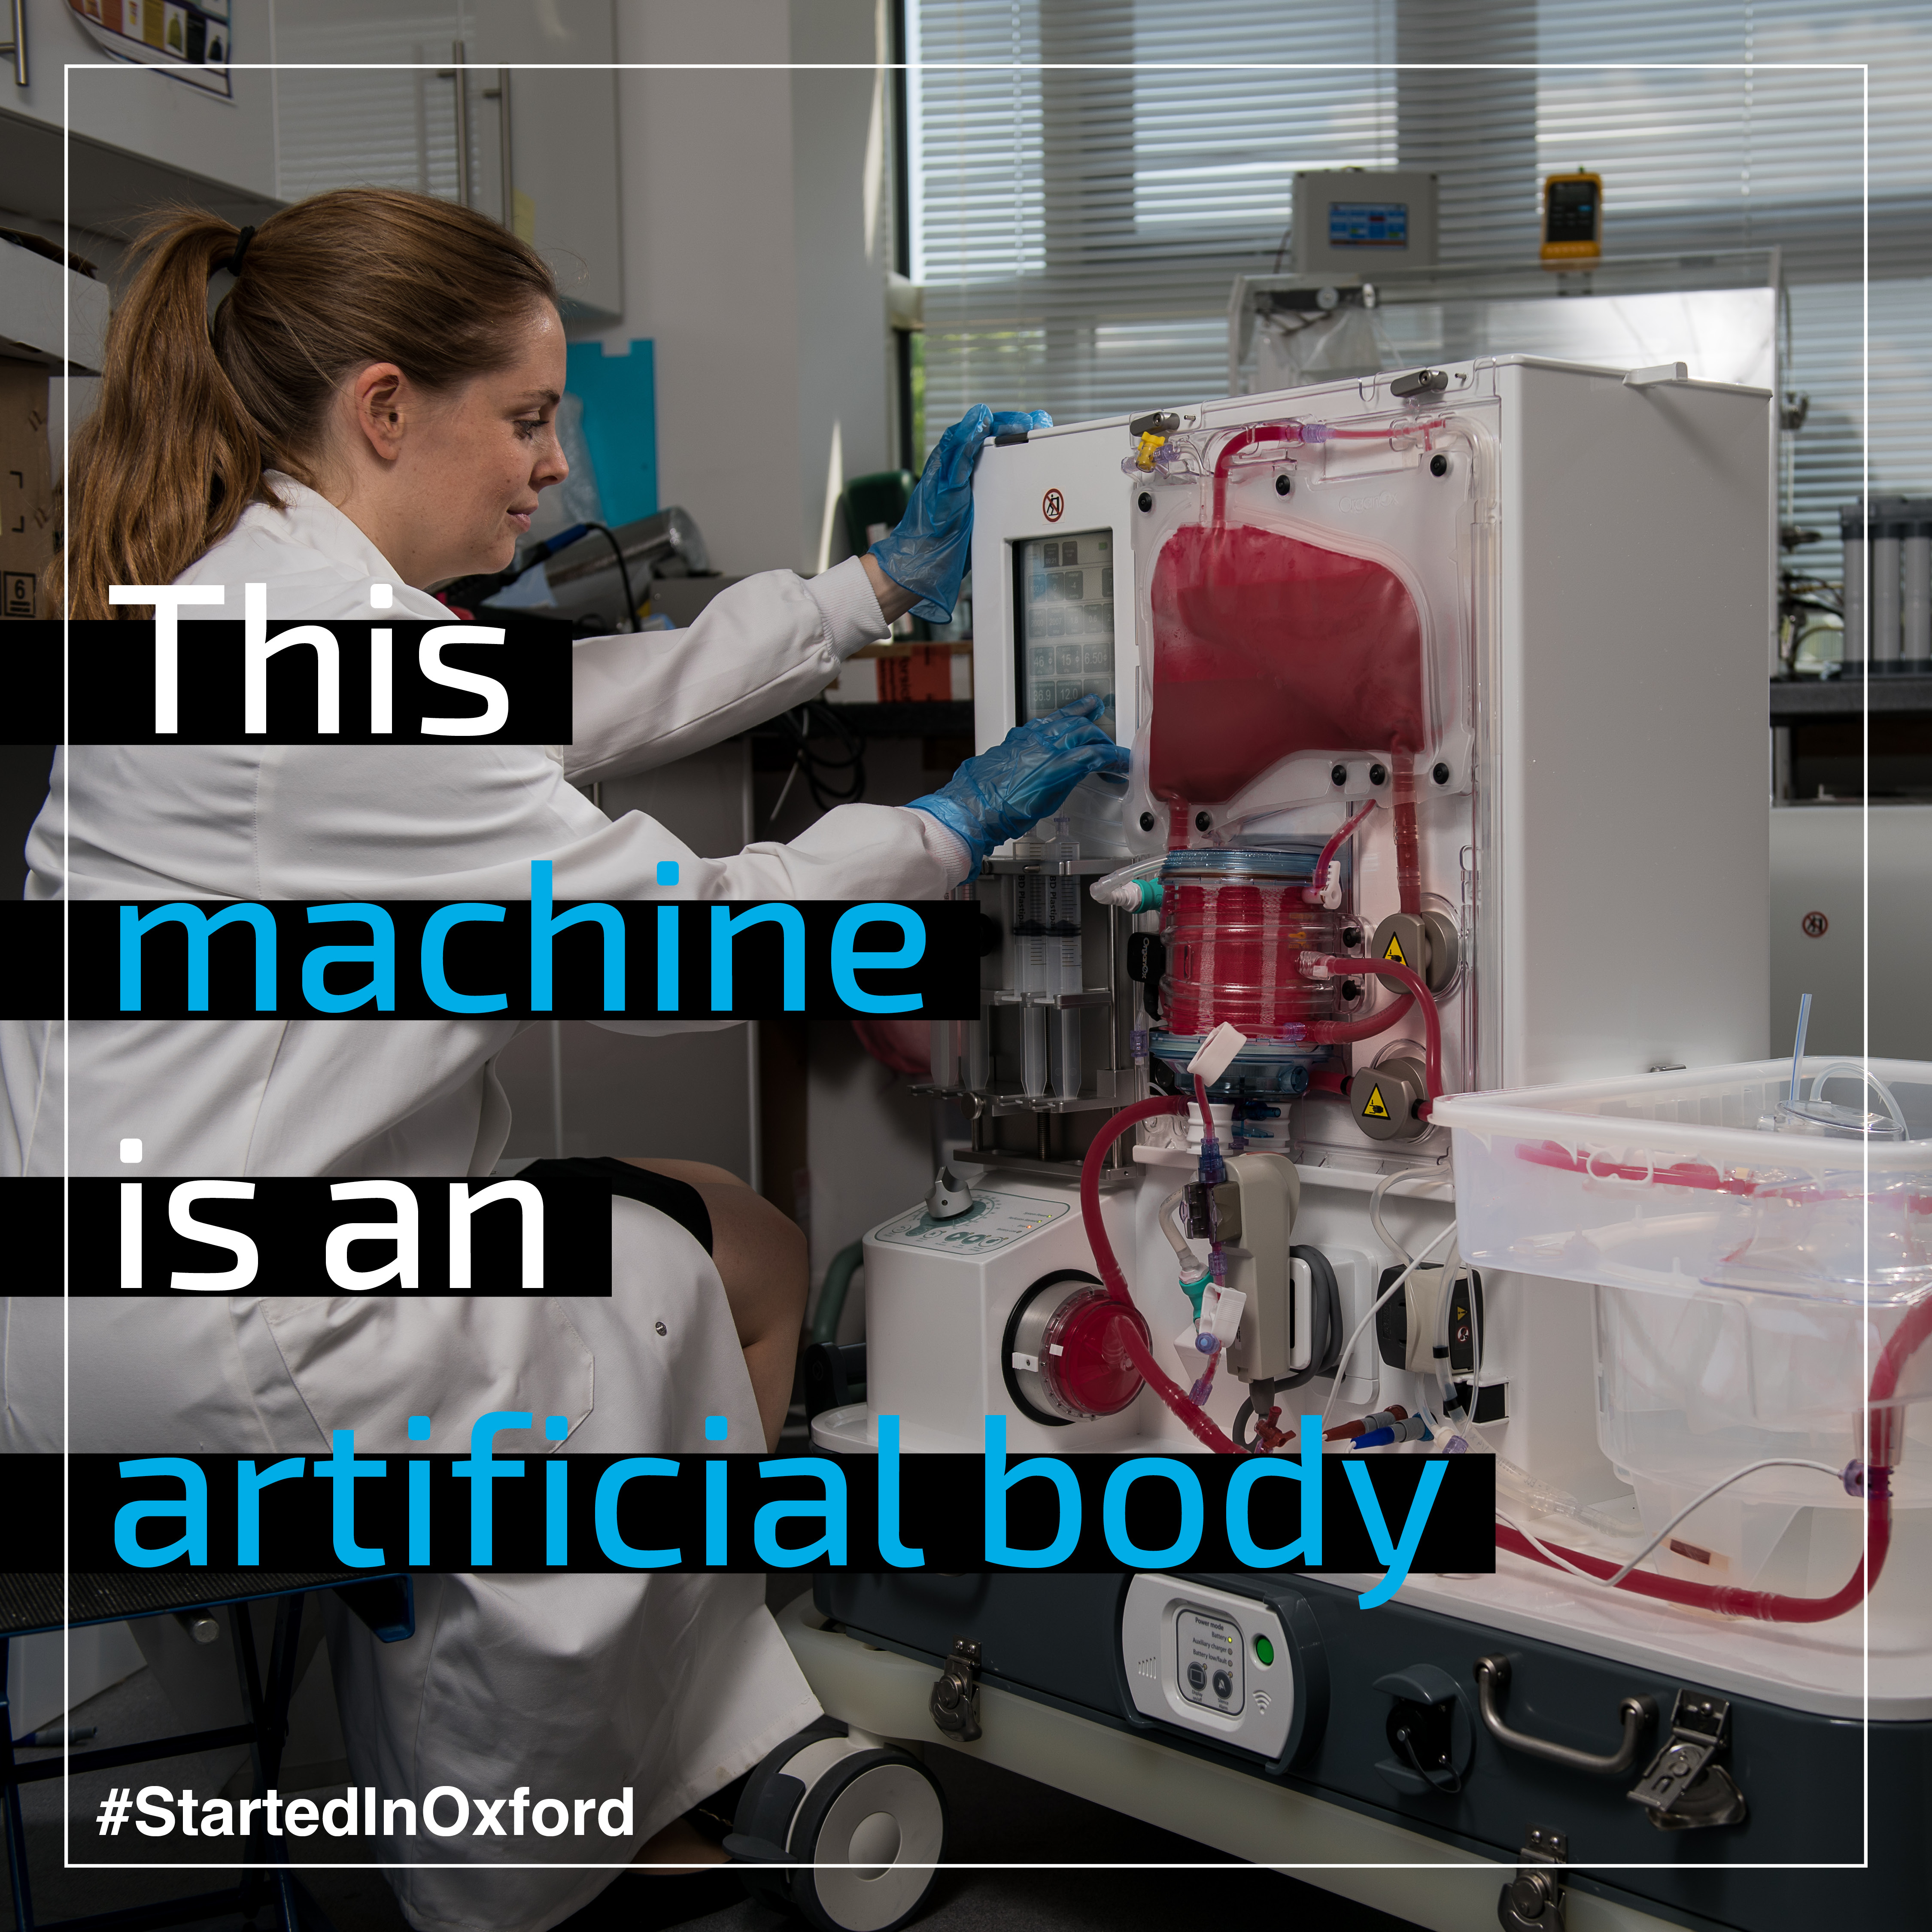 This machine is an artificial body